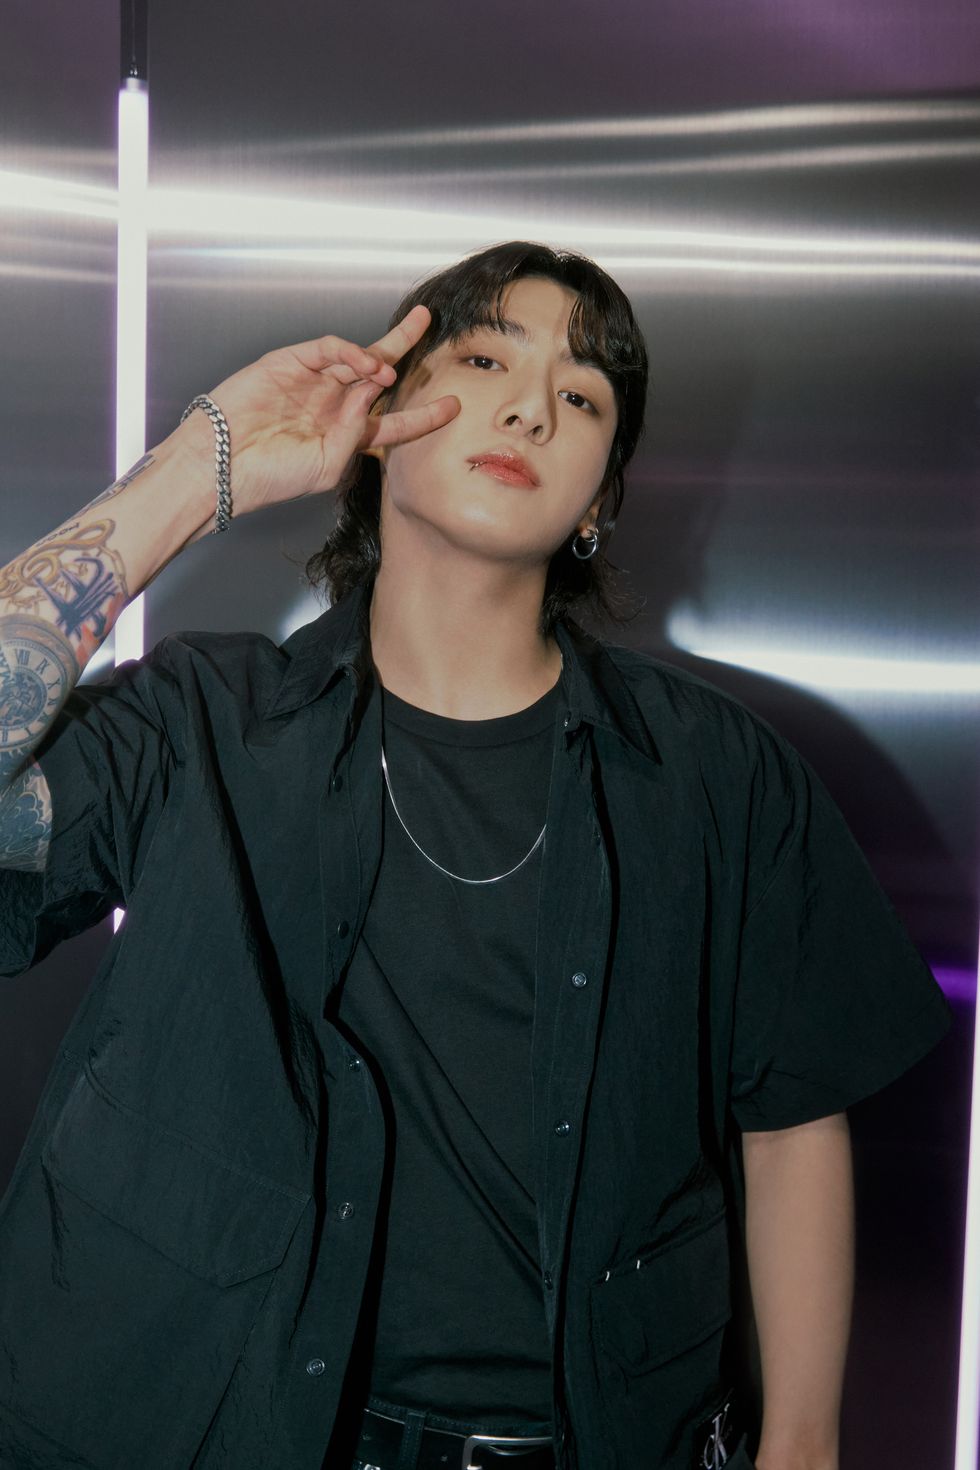 Show Your Inner KPOP Star With These Chic Men’s Jewelry Trends